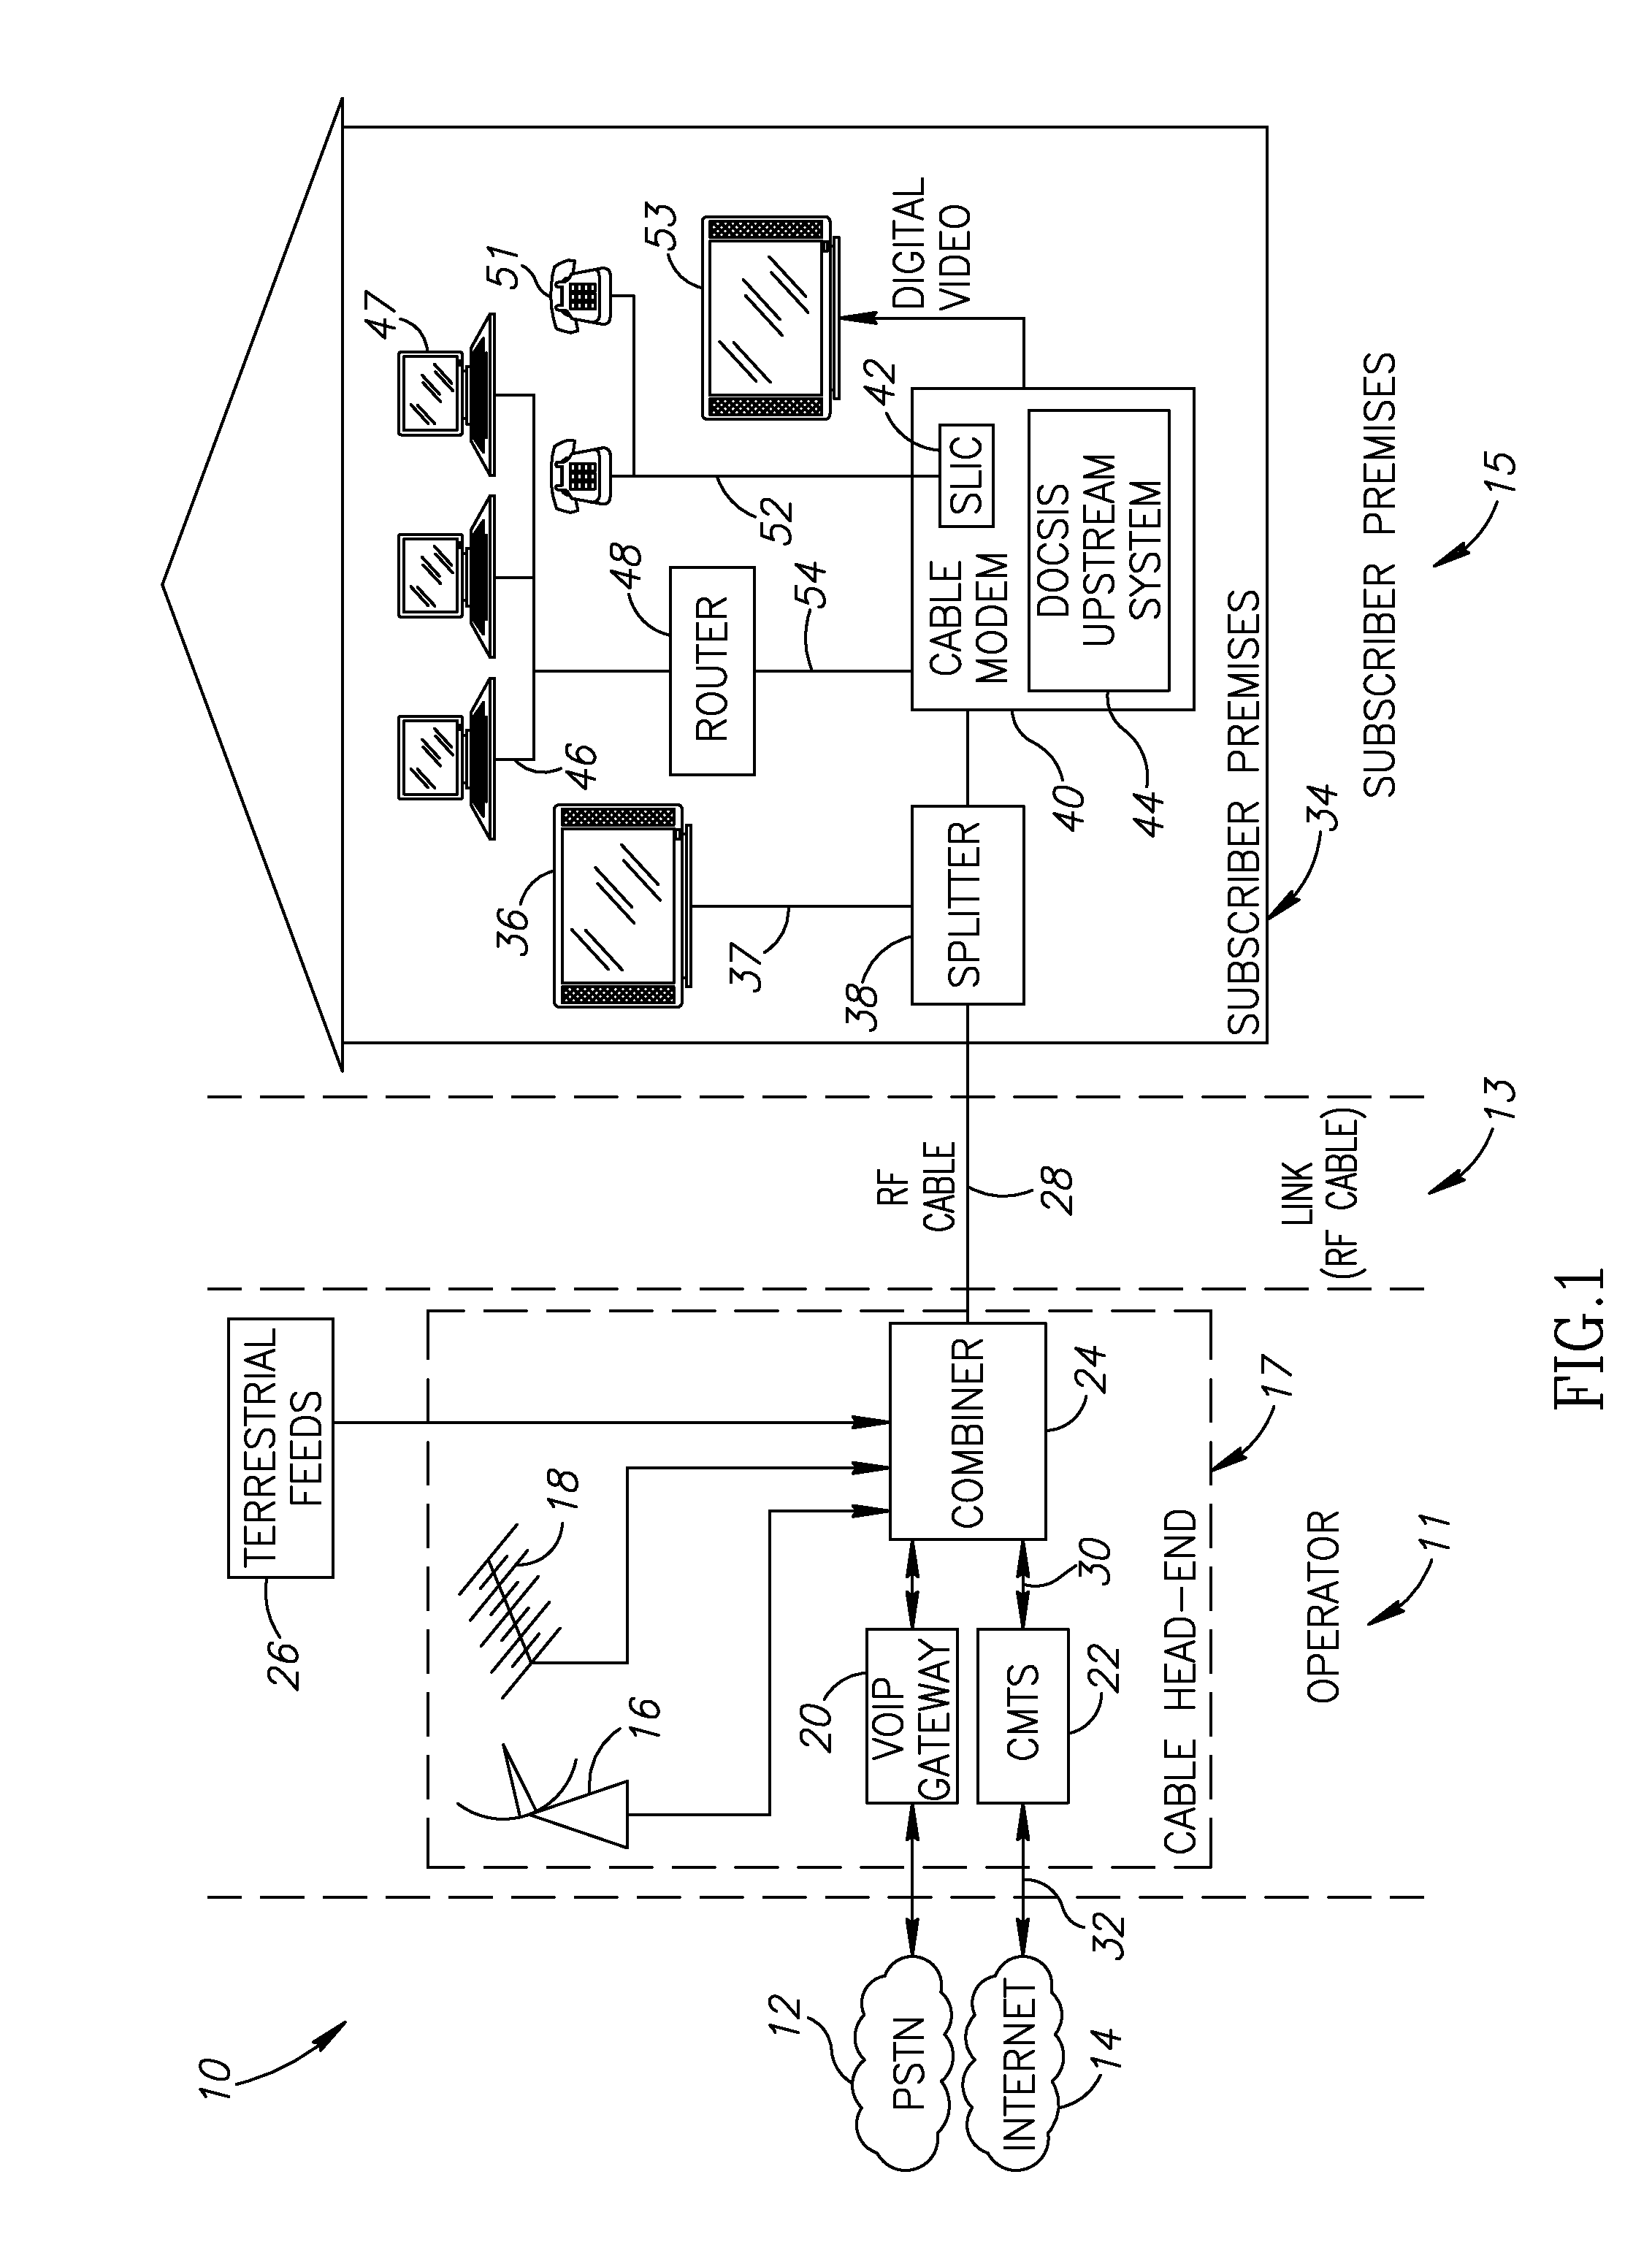 Passive circuit for improved differential amplifier common mode rejection